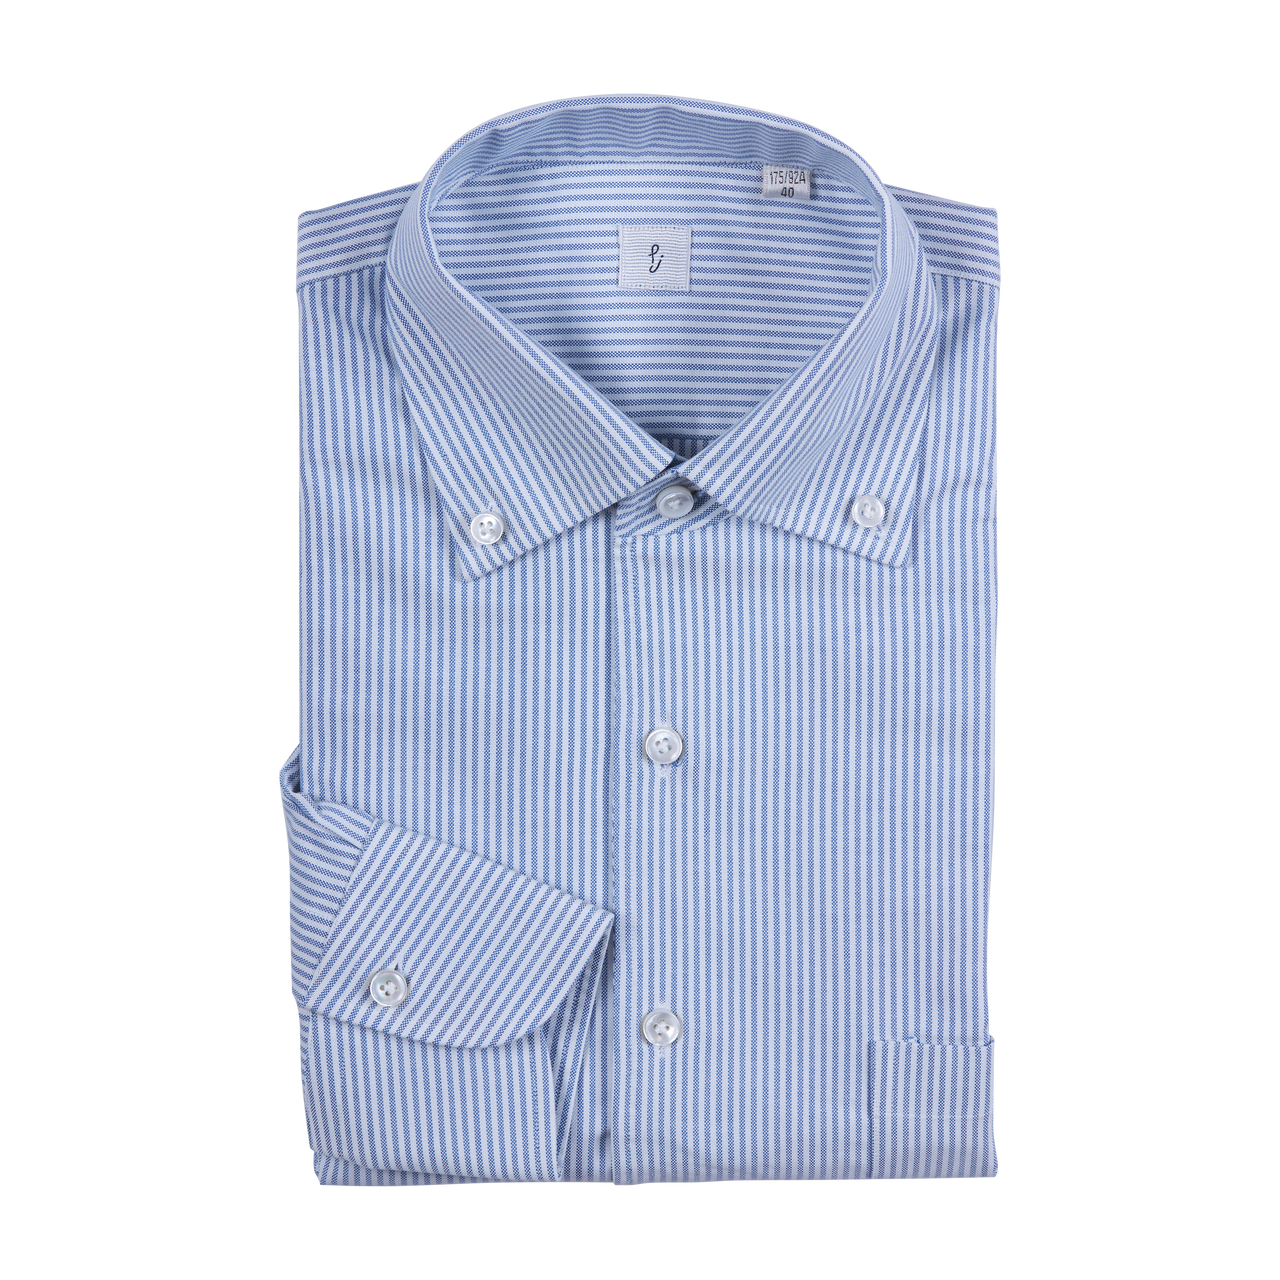 P. Johnson Shirt in Navy Stripe American Oxford with One-Piece Button Down Collar